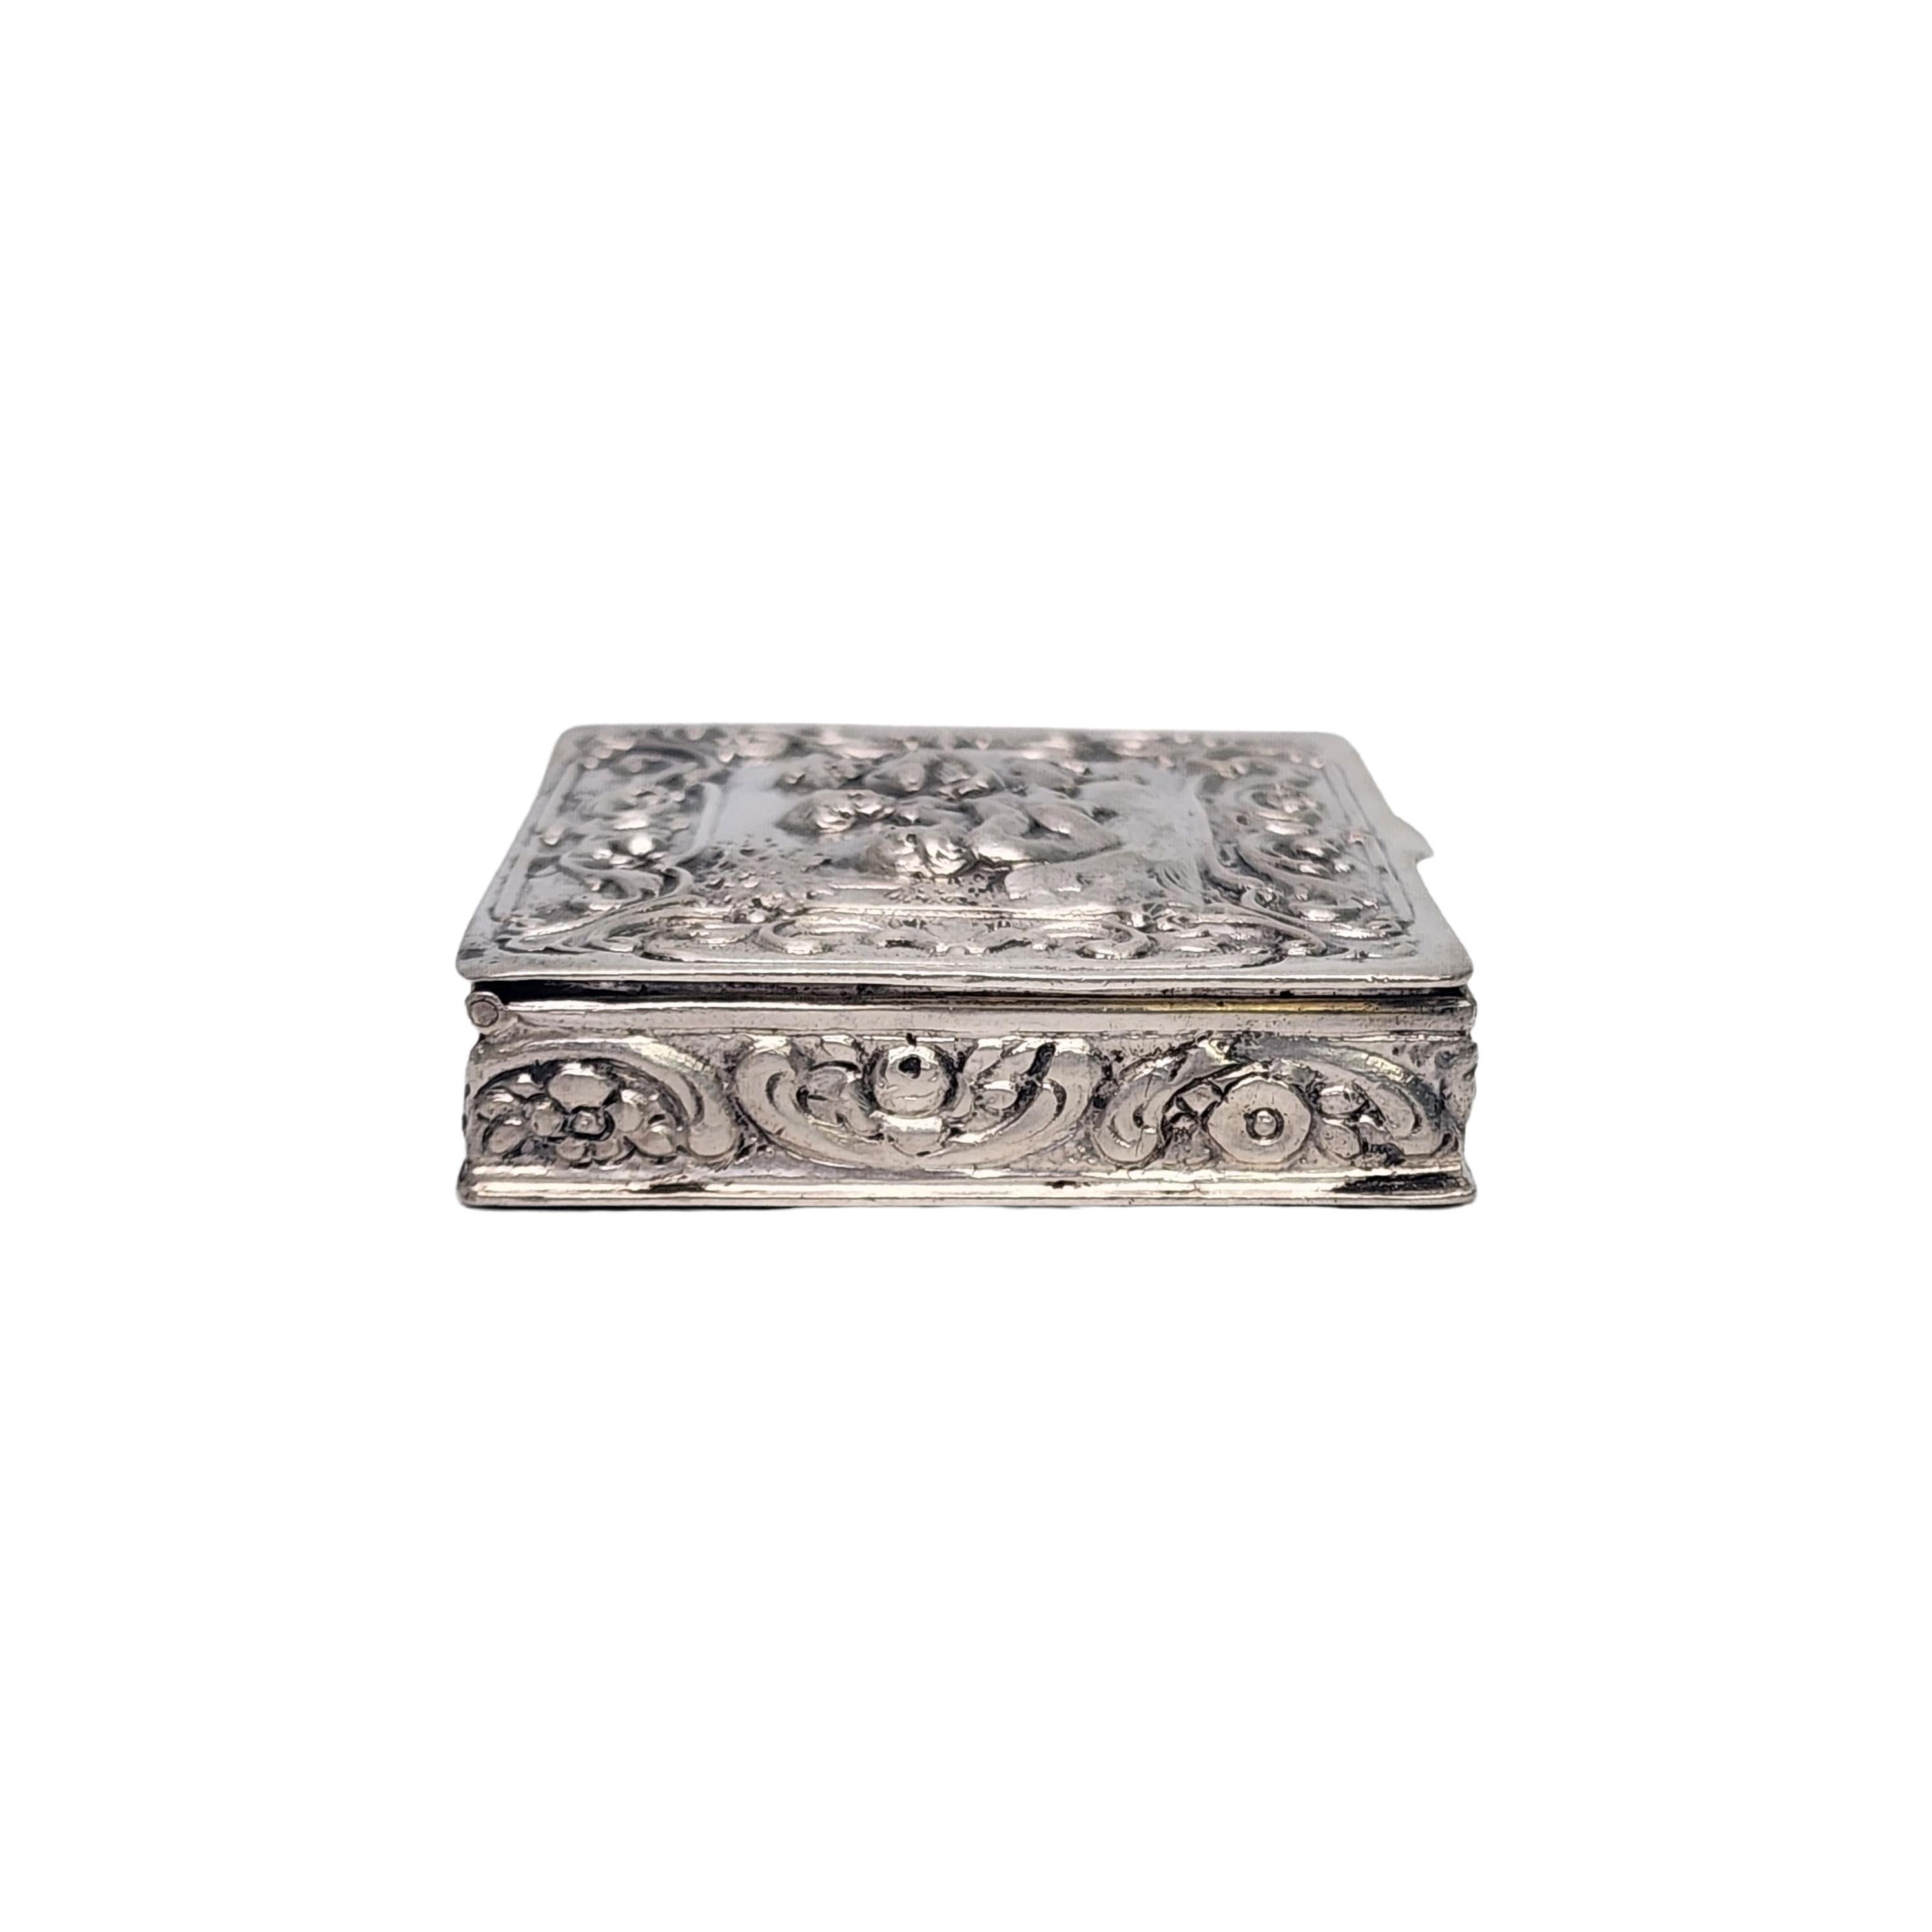 Women's 800 Silver Germany Repousse Snuff/Trinket/Pill Box #16529 For Sale